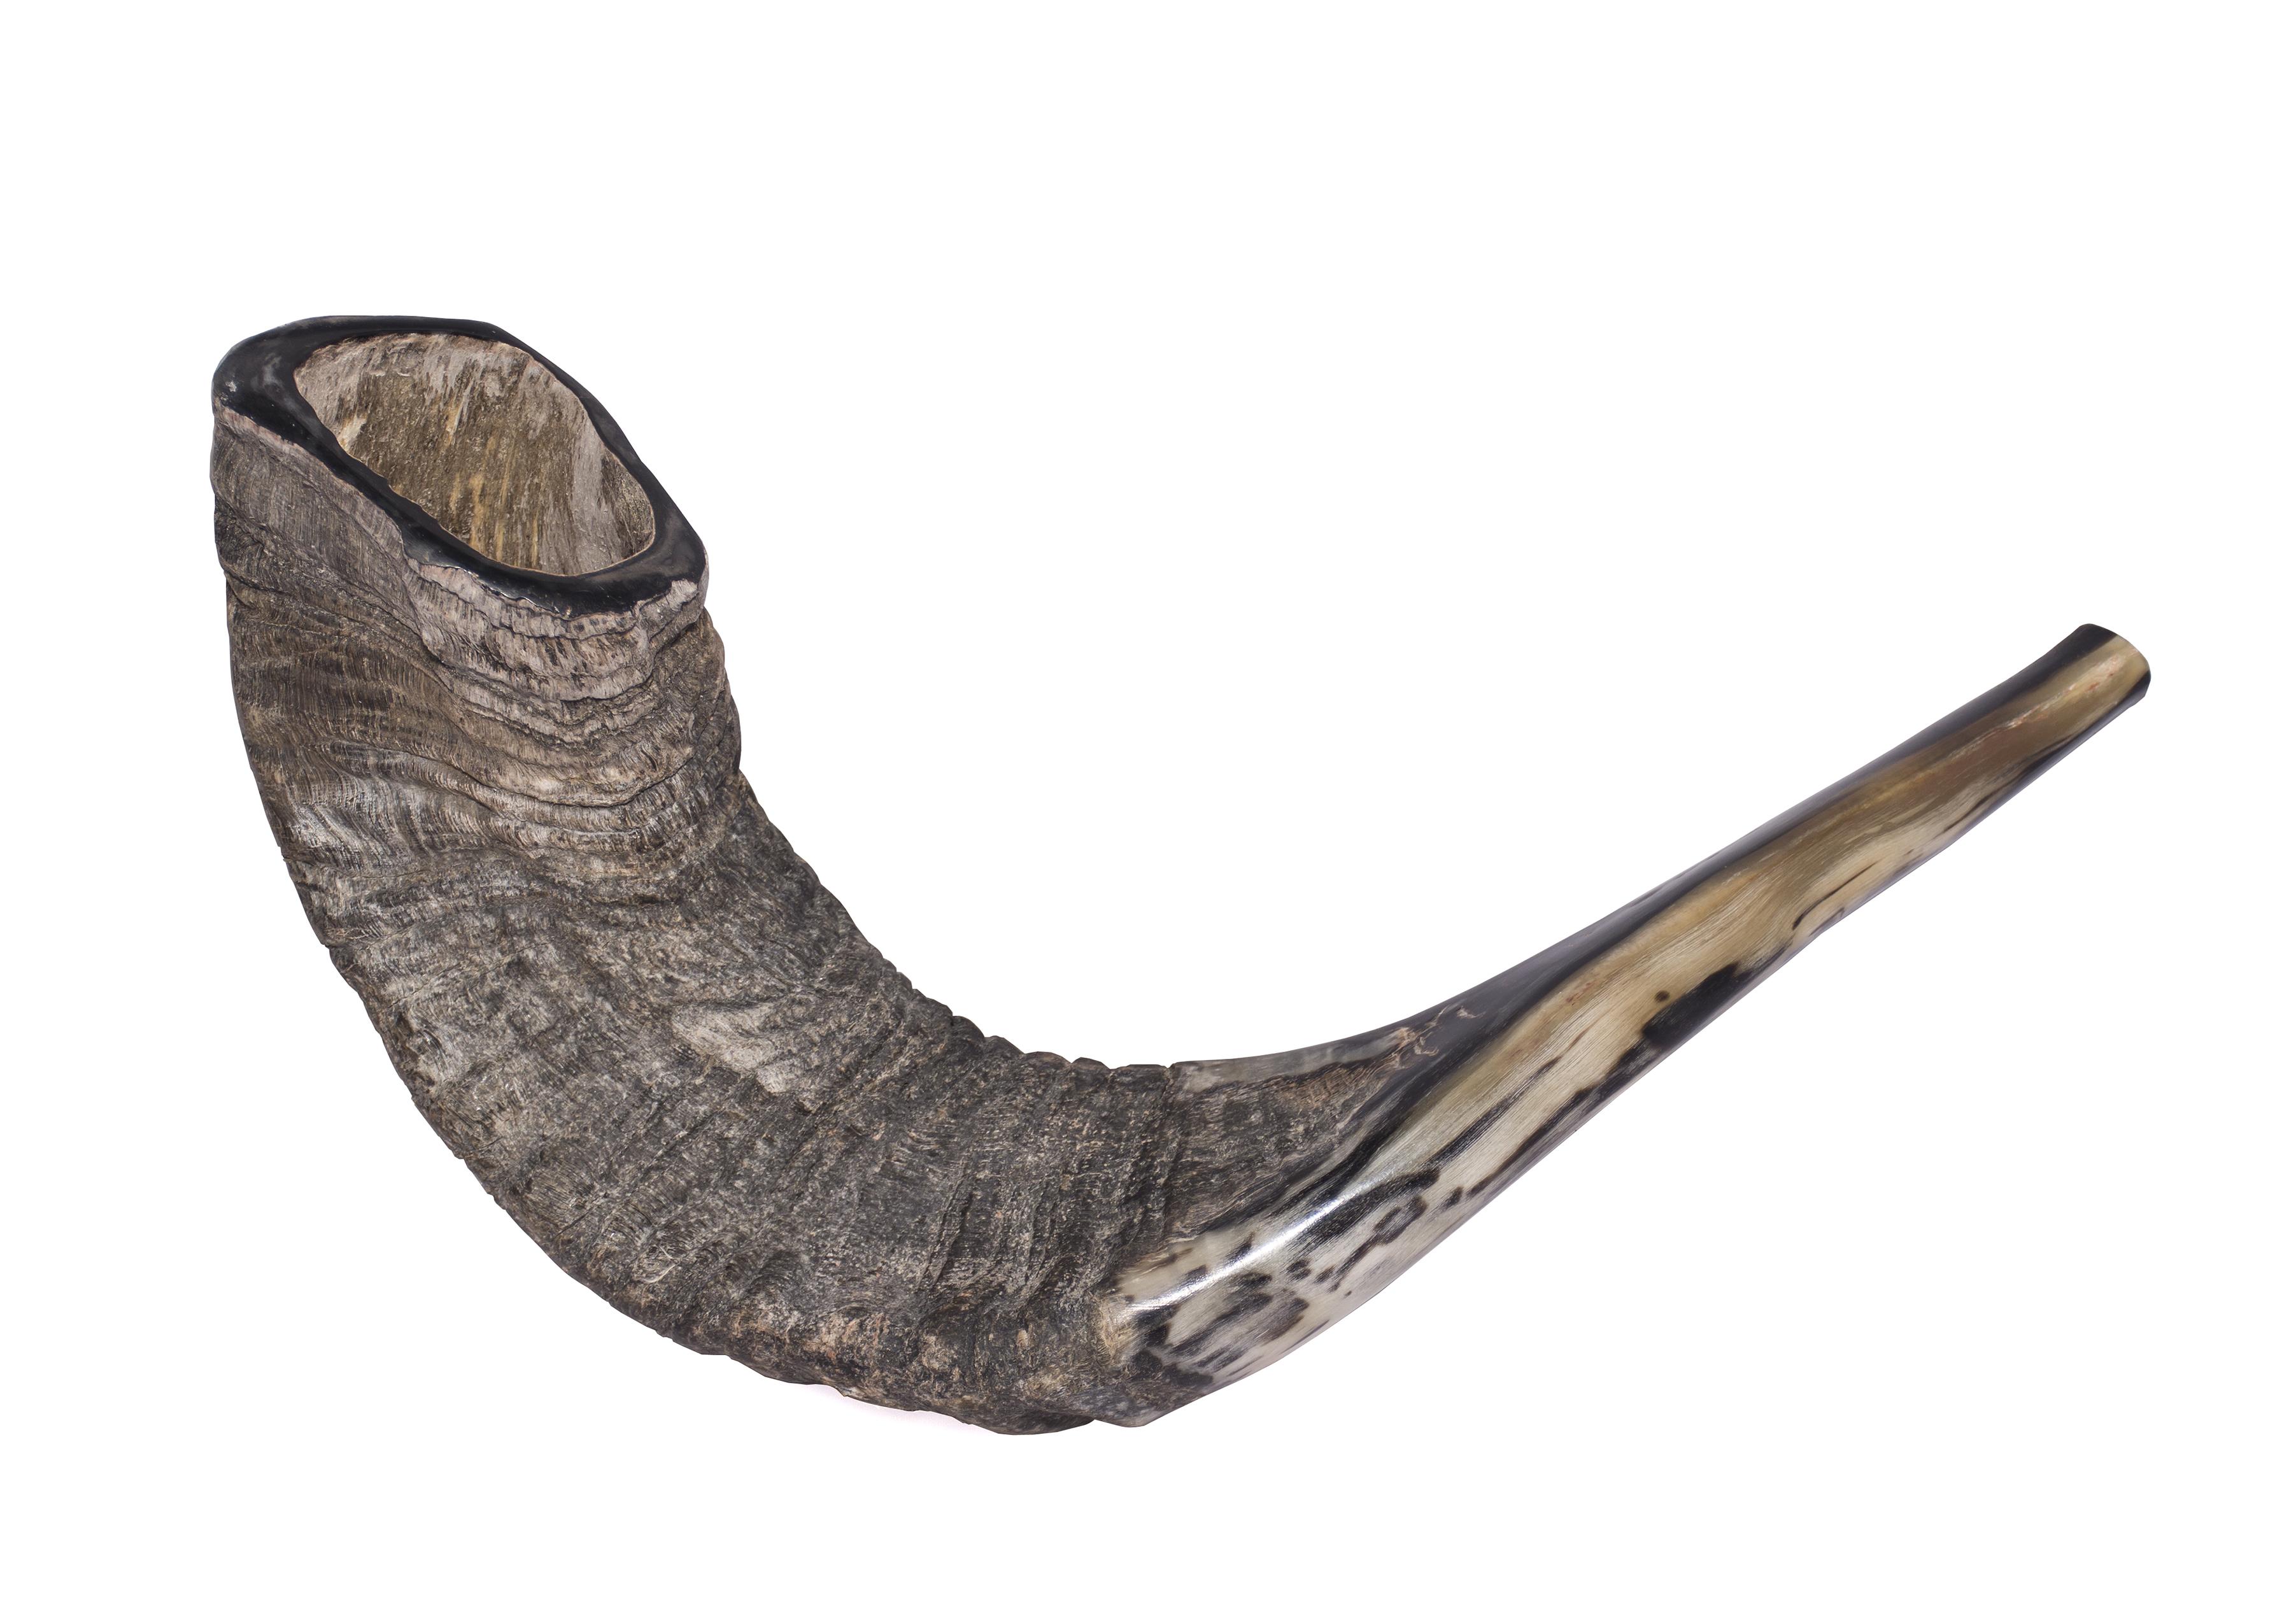 A trumpet made out of a ram's horn.